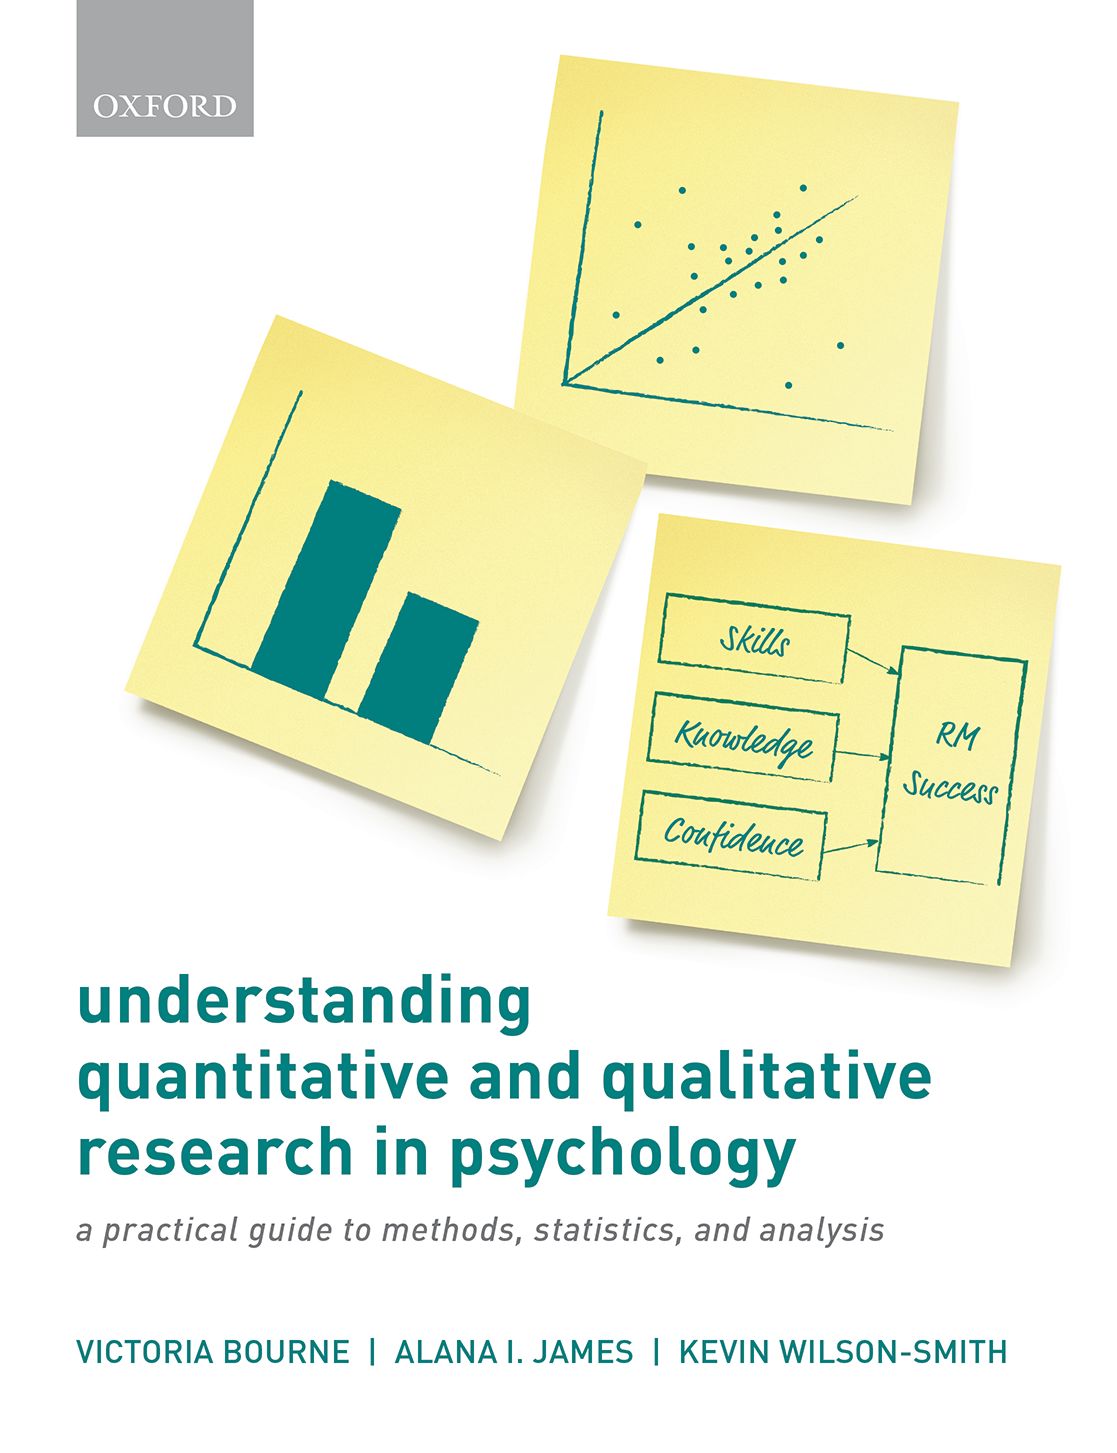 topics for quantitative research in psychology